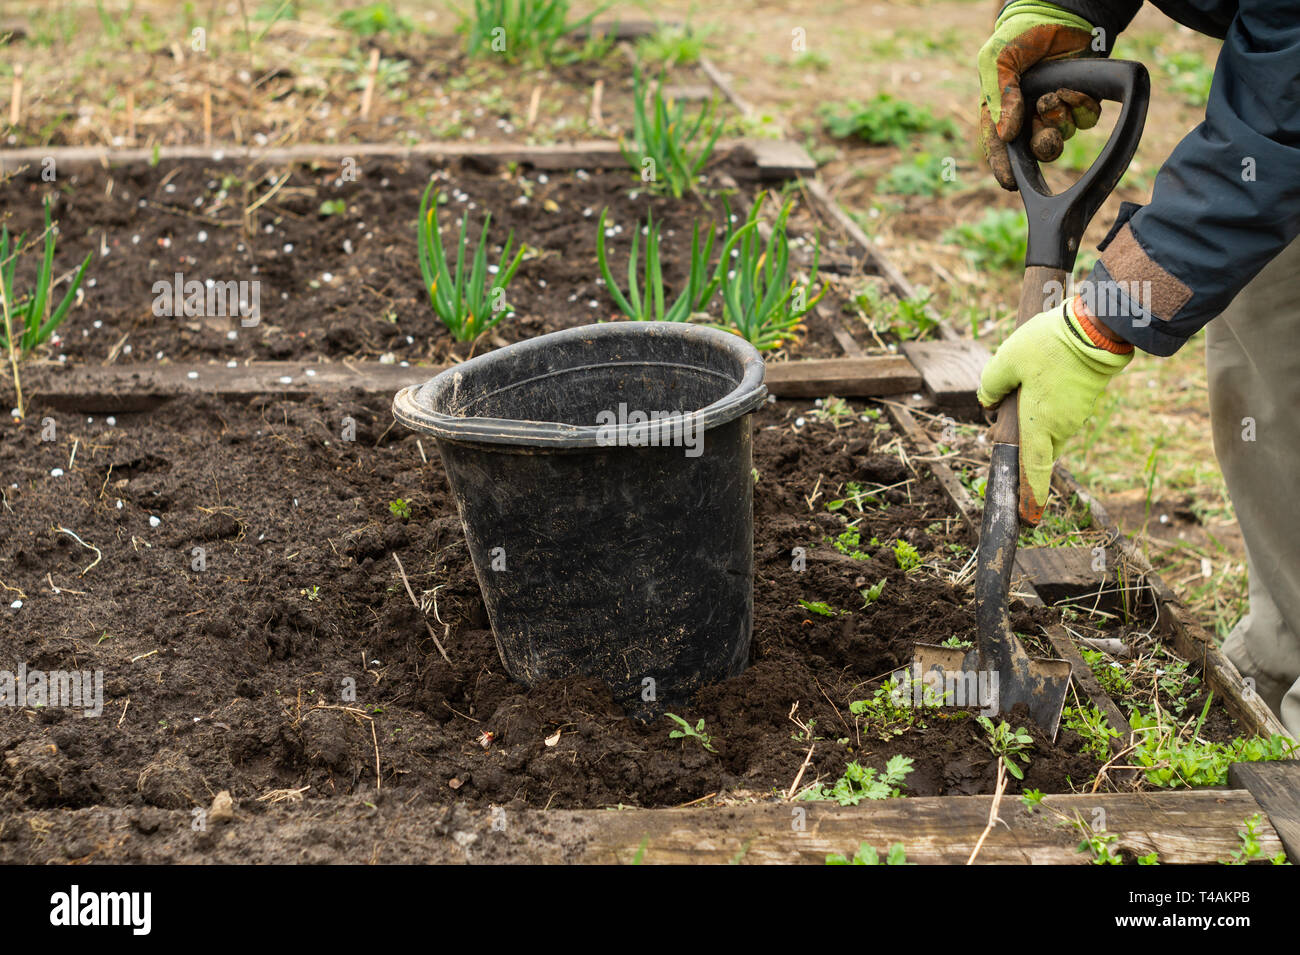 A man is digging a shovel soil in the garden in spring Stock Photo